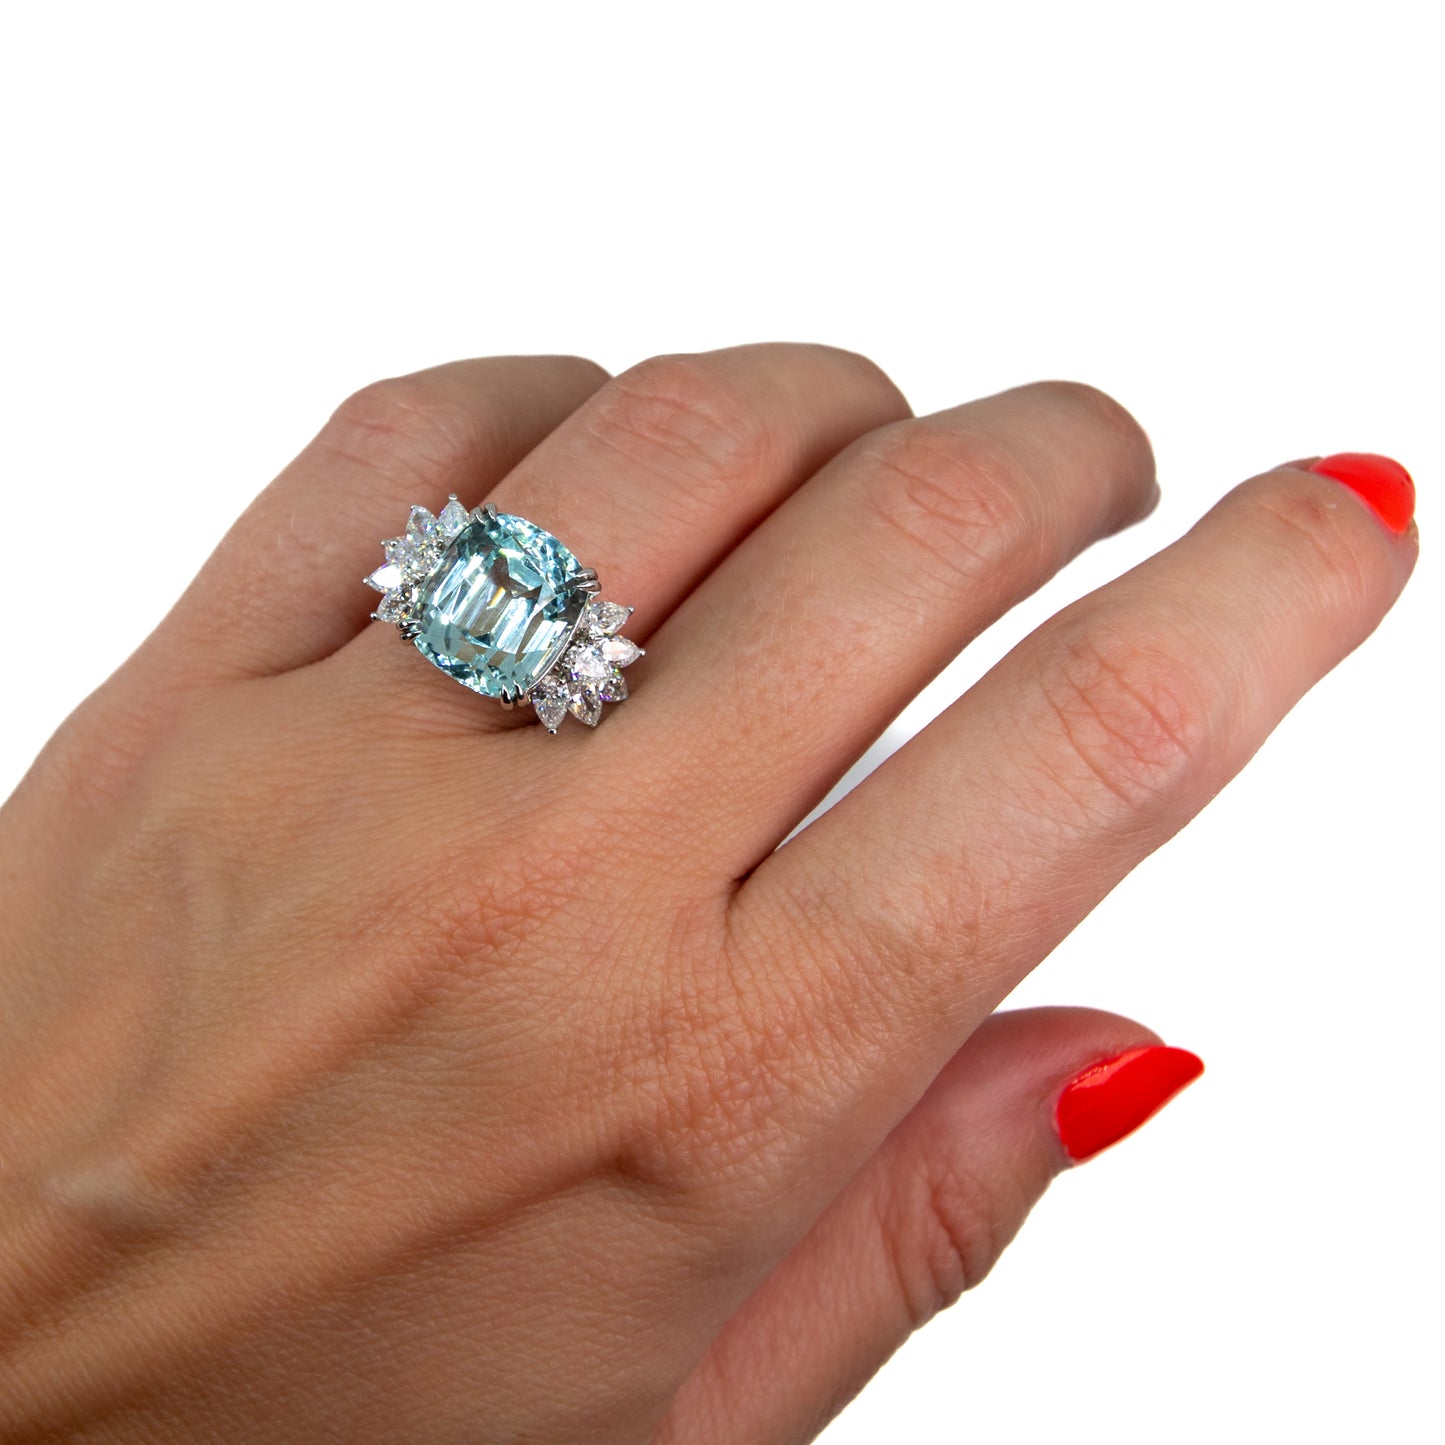 Aquamarine and diamond cocktail ring Hong Kong by Valentina Fine Jewellery